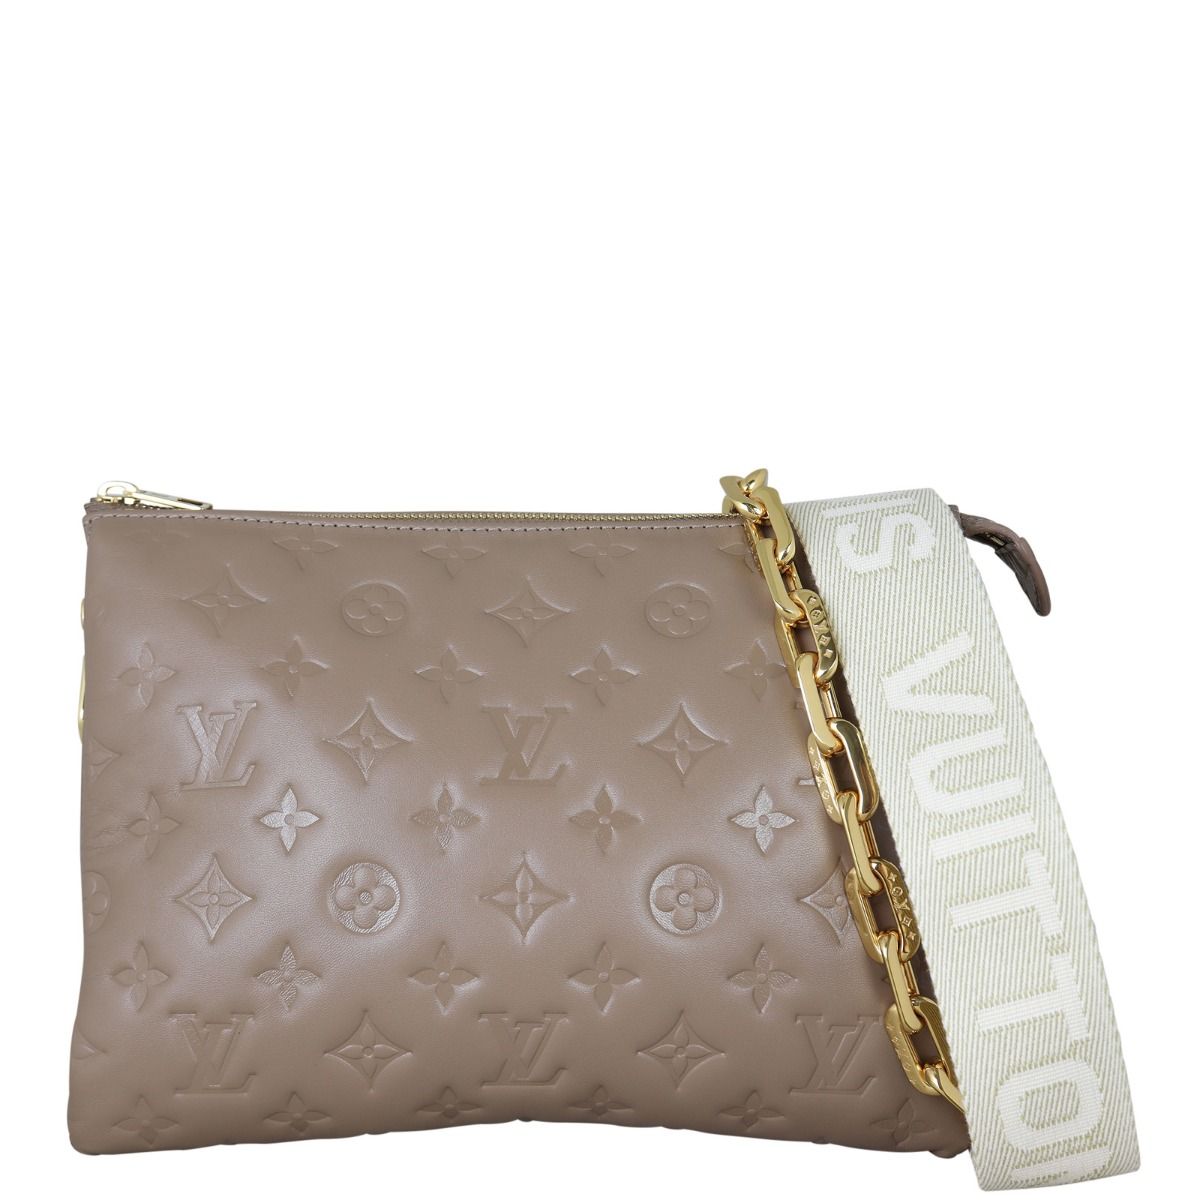 LOUIS VUITTON Lambskin Embossed Monogram Coussin PM Taupe 859288